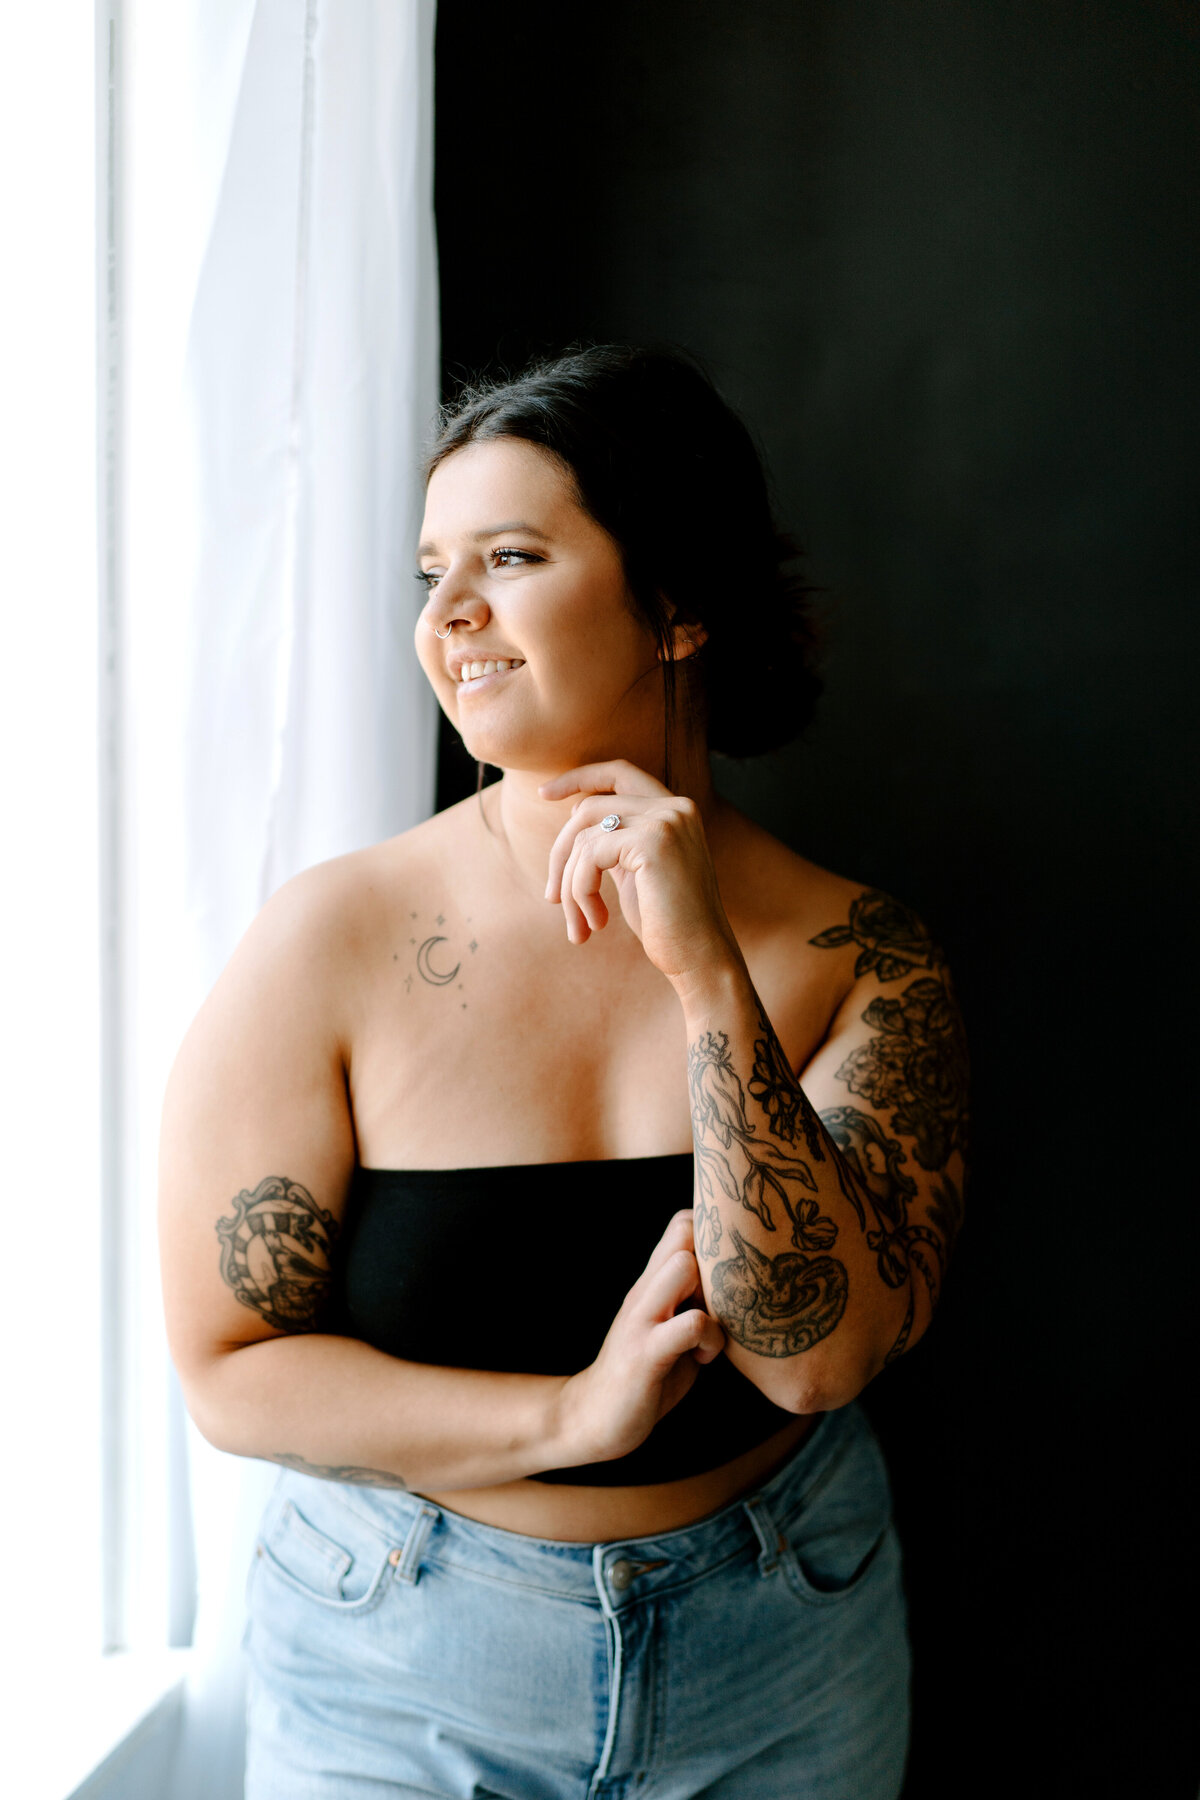 Girl facing towards window with tattoos on arm